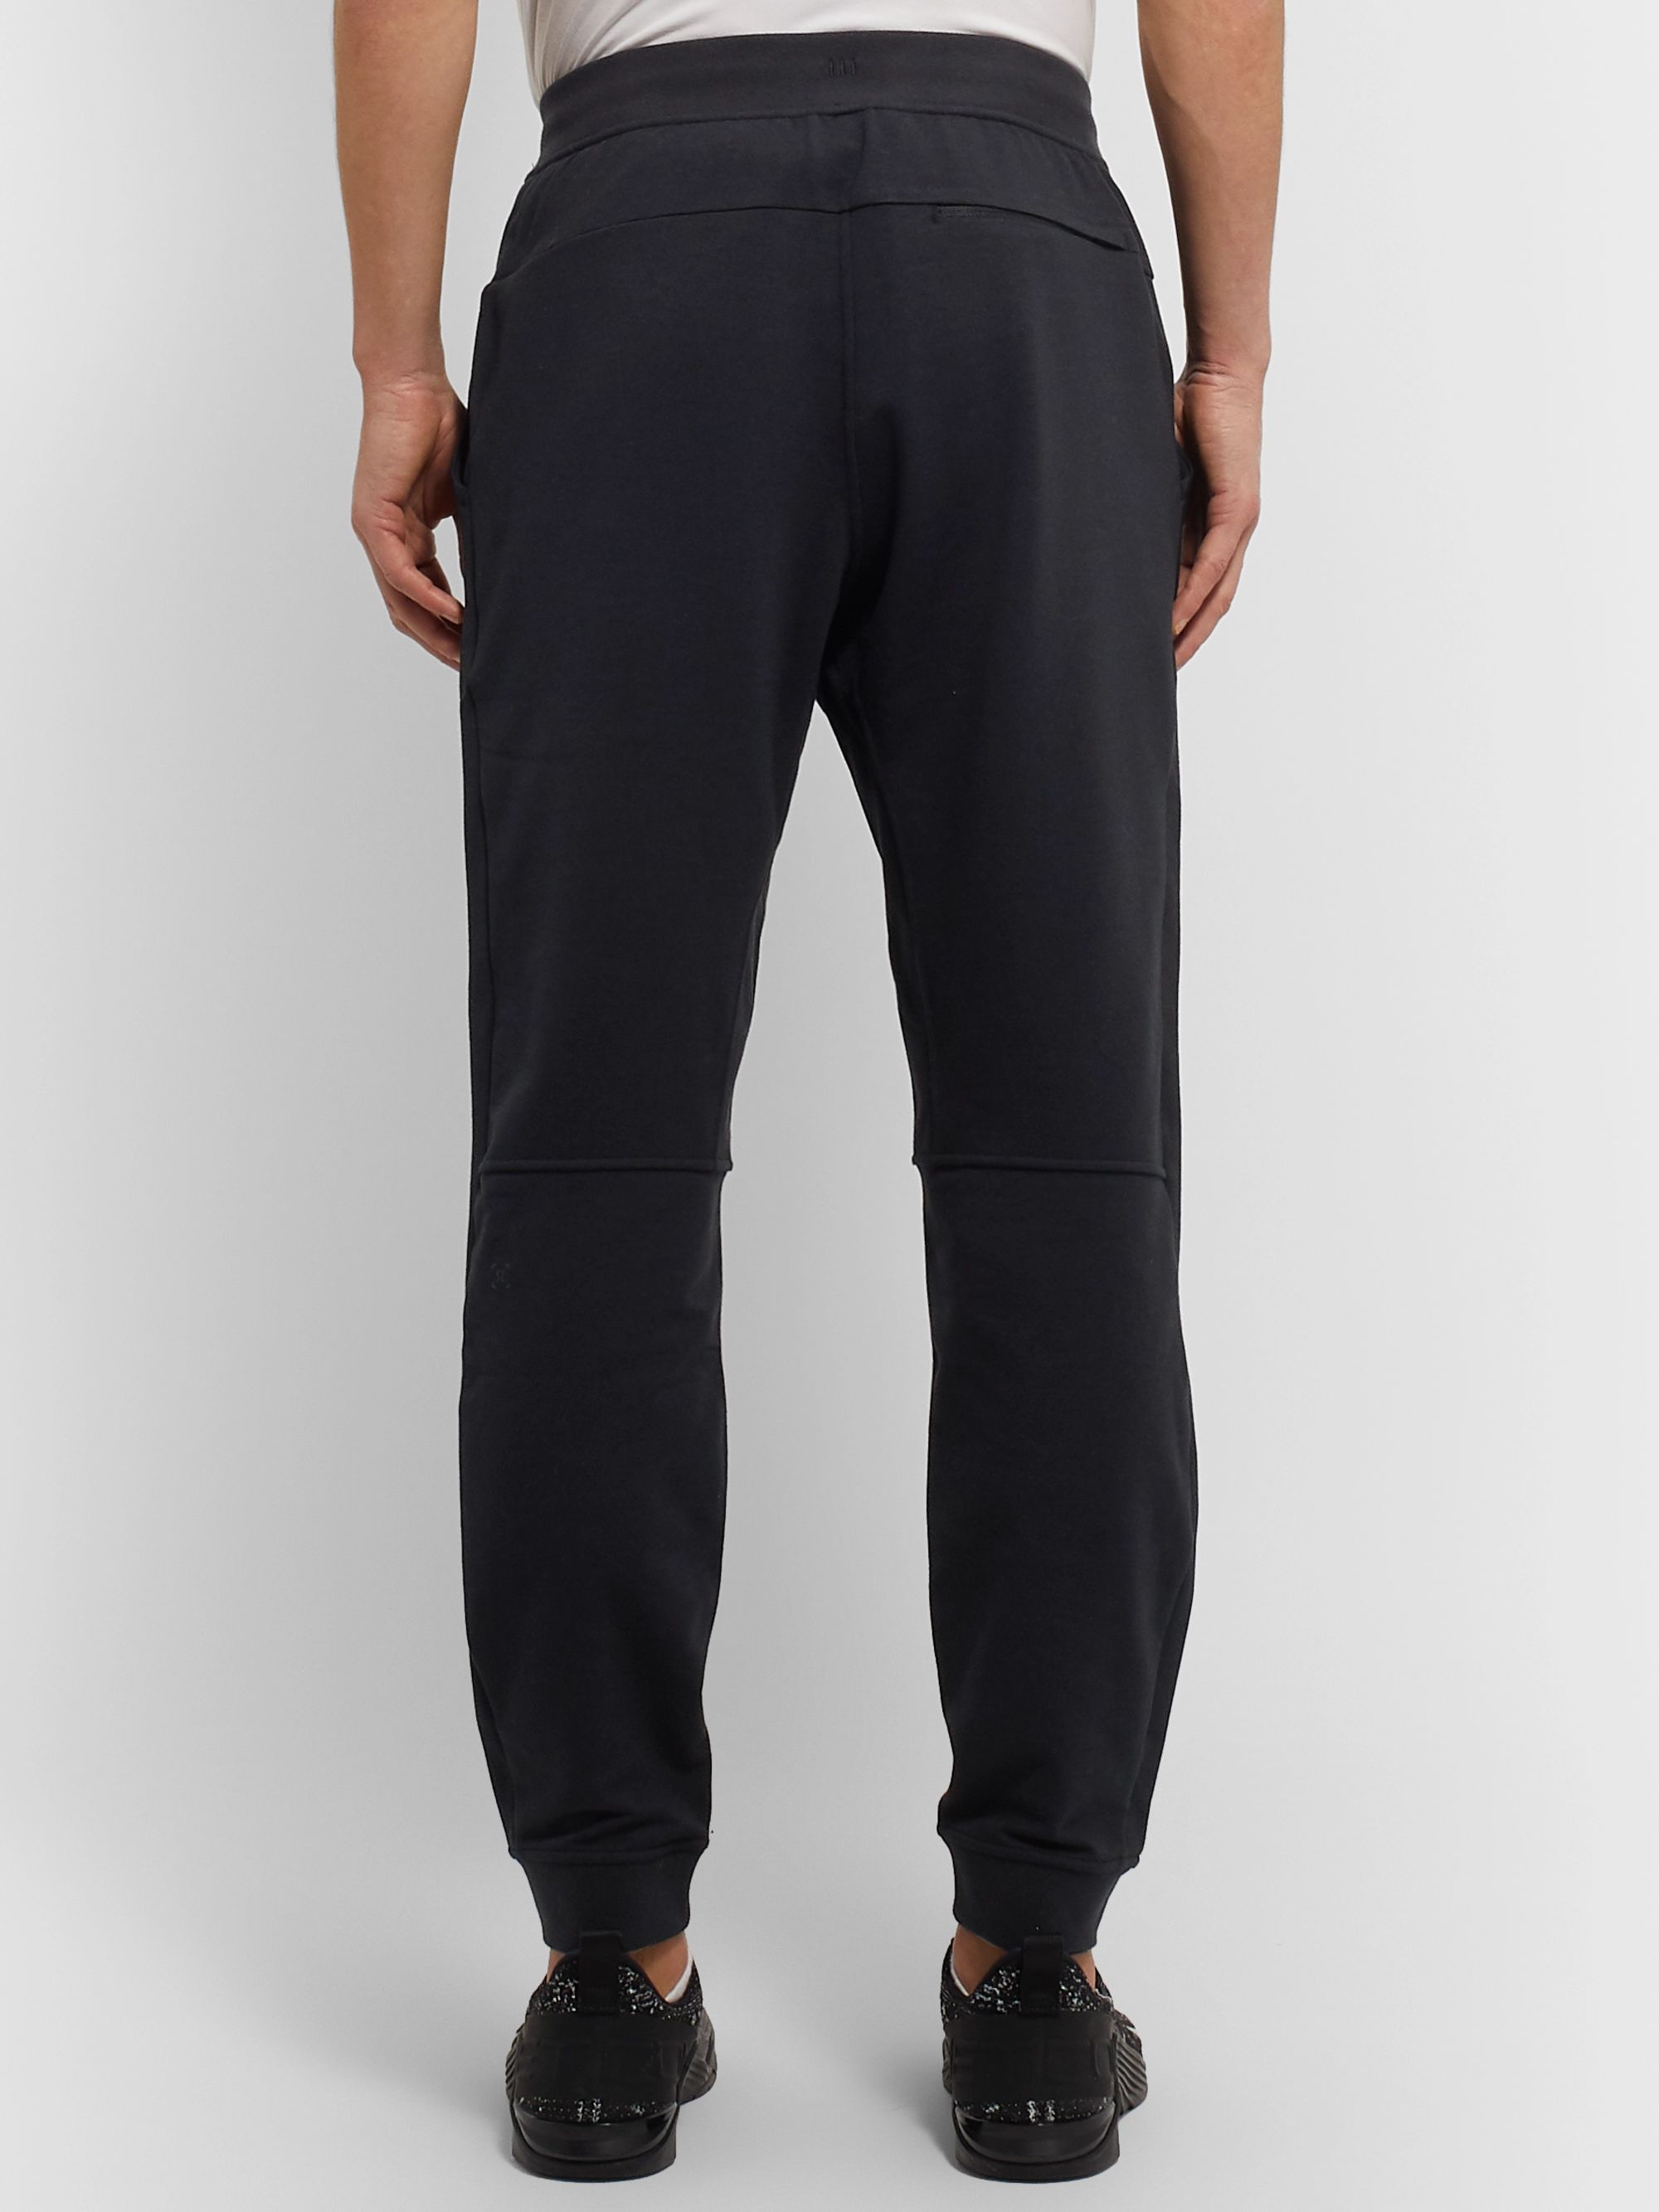 Black City Sweat Slim-Fit Tapered French Terry Sweatpants | LULULEMON ...